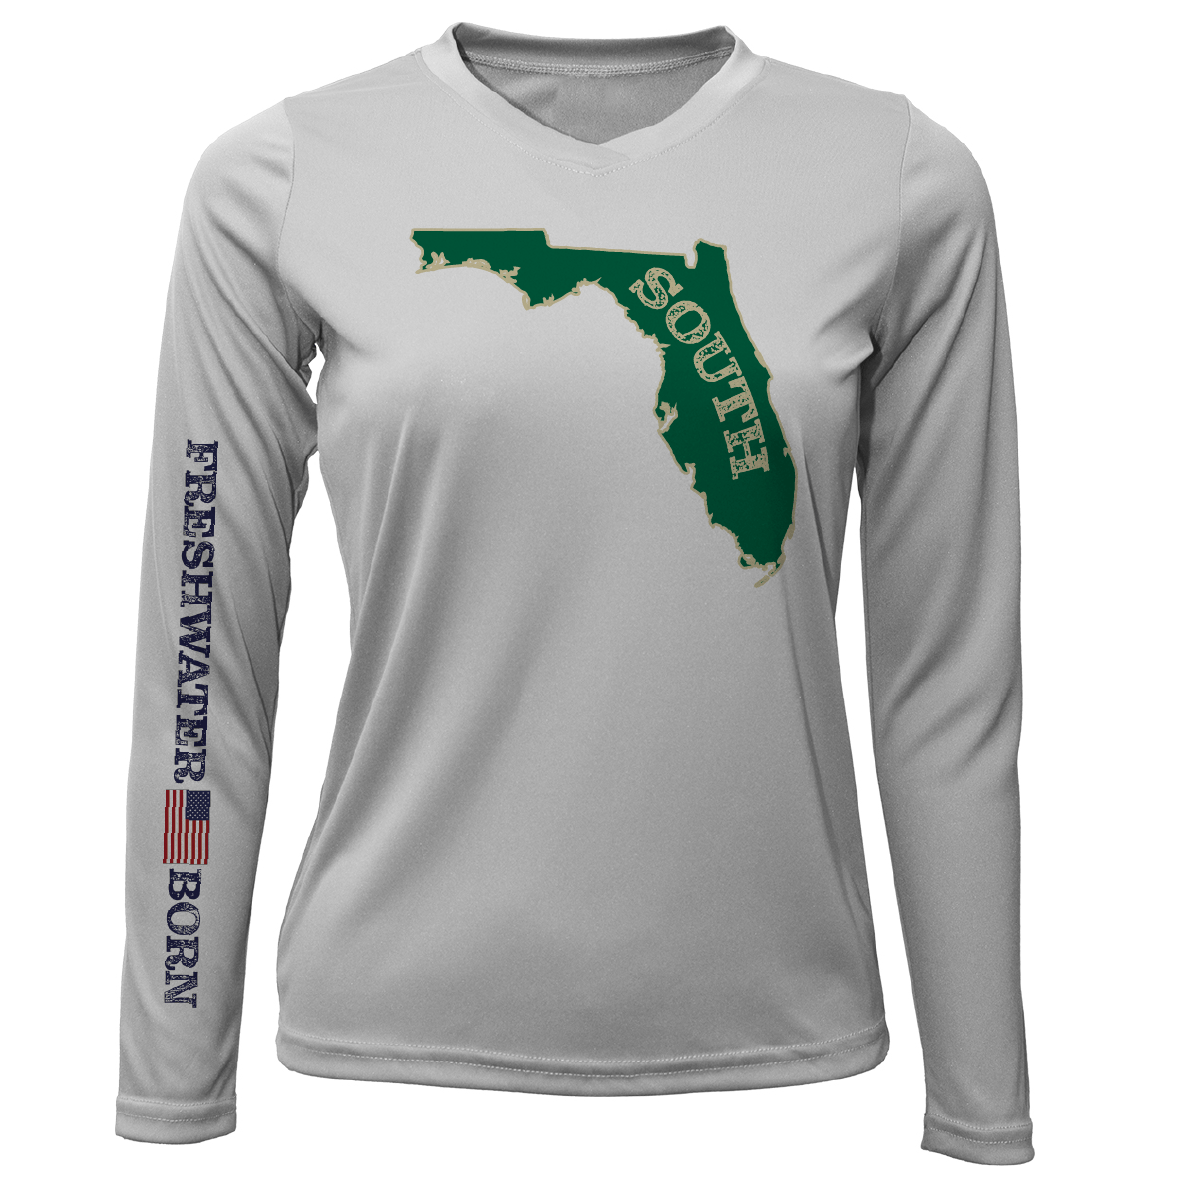 USF Green and Gold Freshwater Born Women's Long Sleeve UPF 50+ Dry-Fit Shirt in Seafoam | Size XS